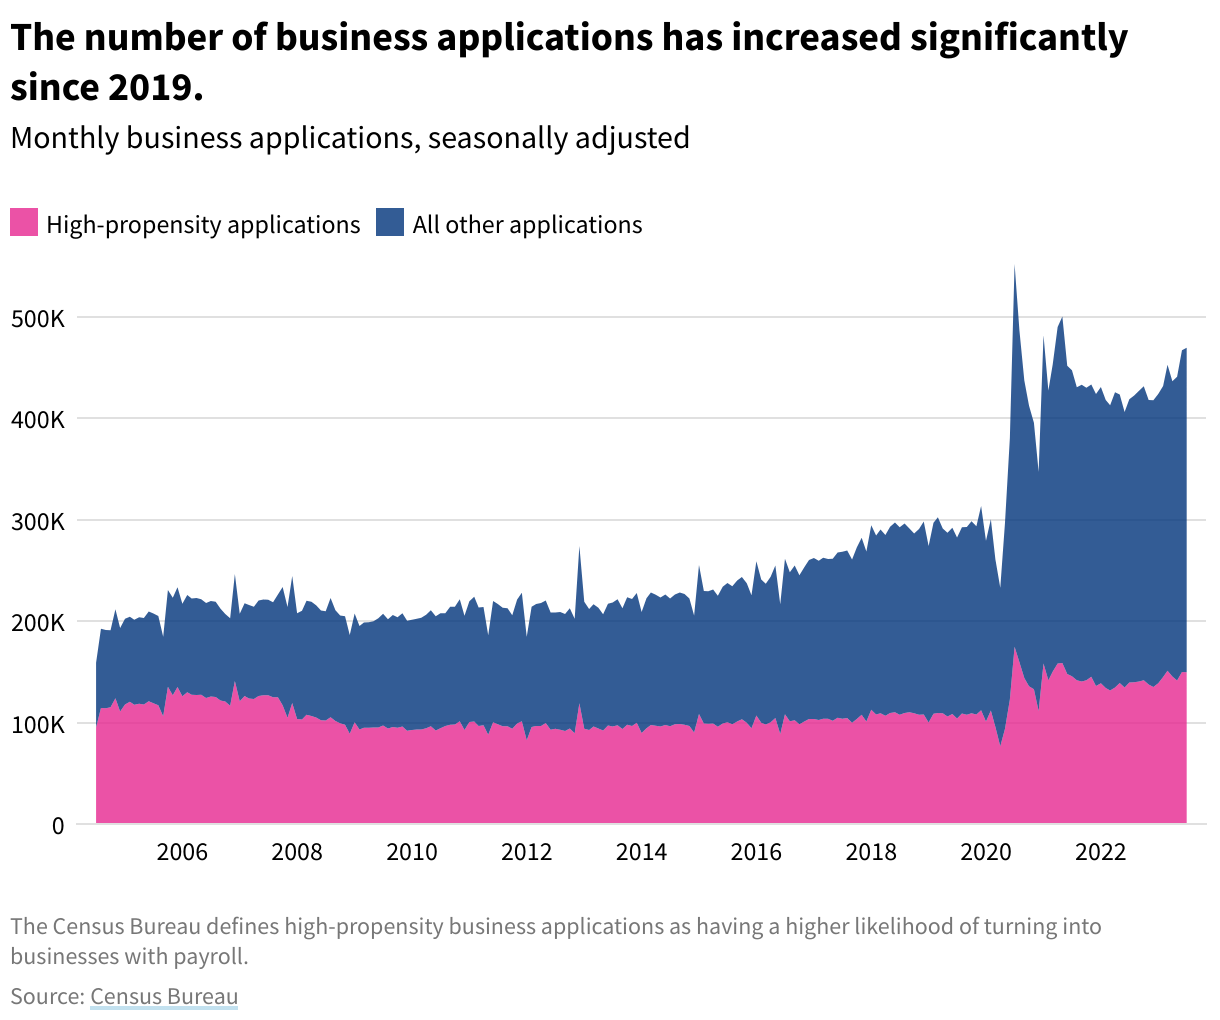 Area chart showing the number of monthly high-propensity and other business applications from August 2004 to July 2023.